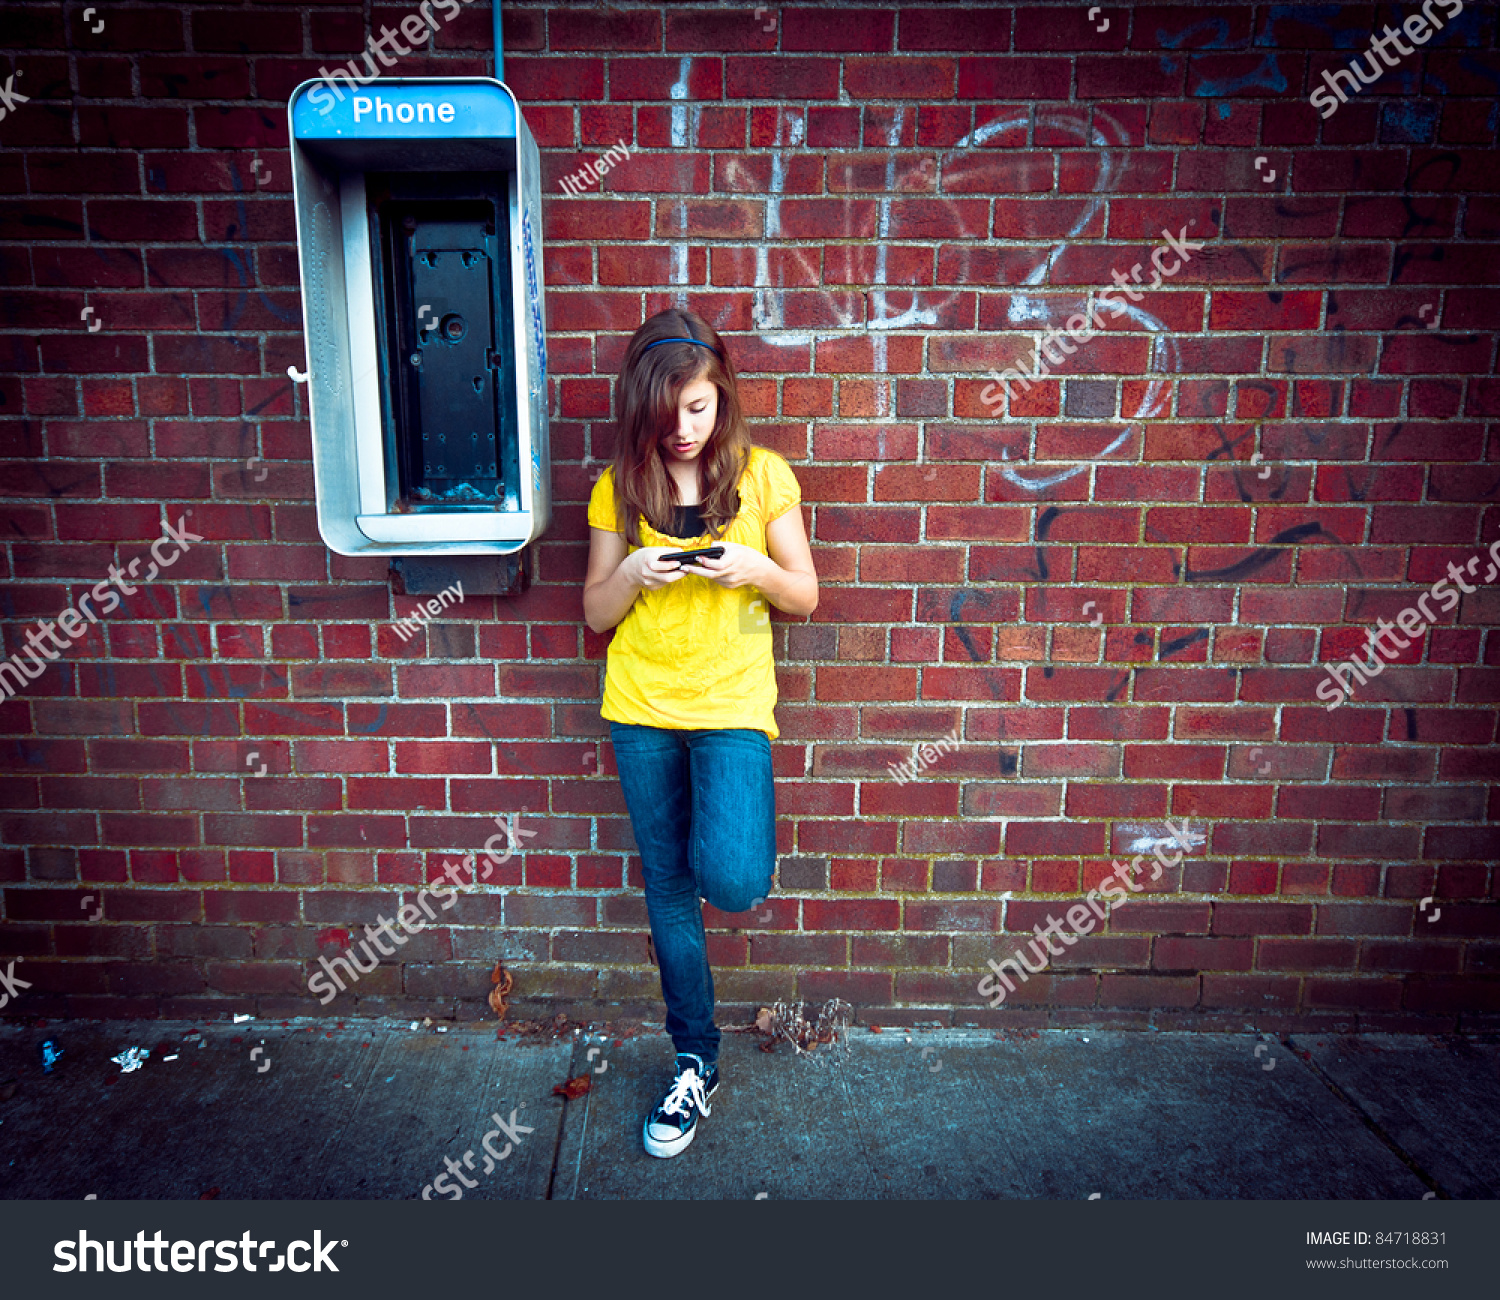 Gitty Image Of A Girl Texting On Her Cell Phone Next To An Old Out Of ...